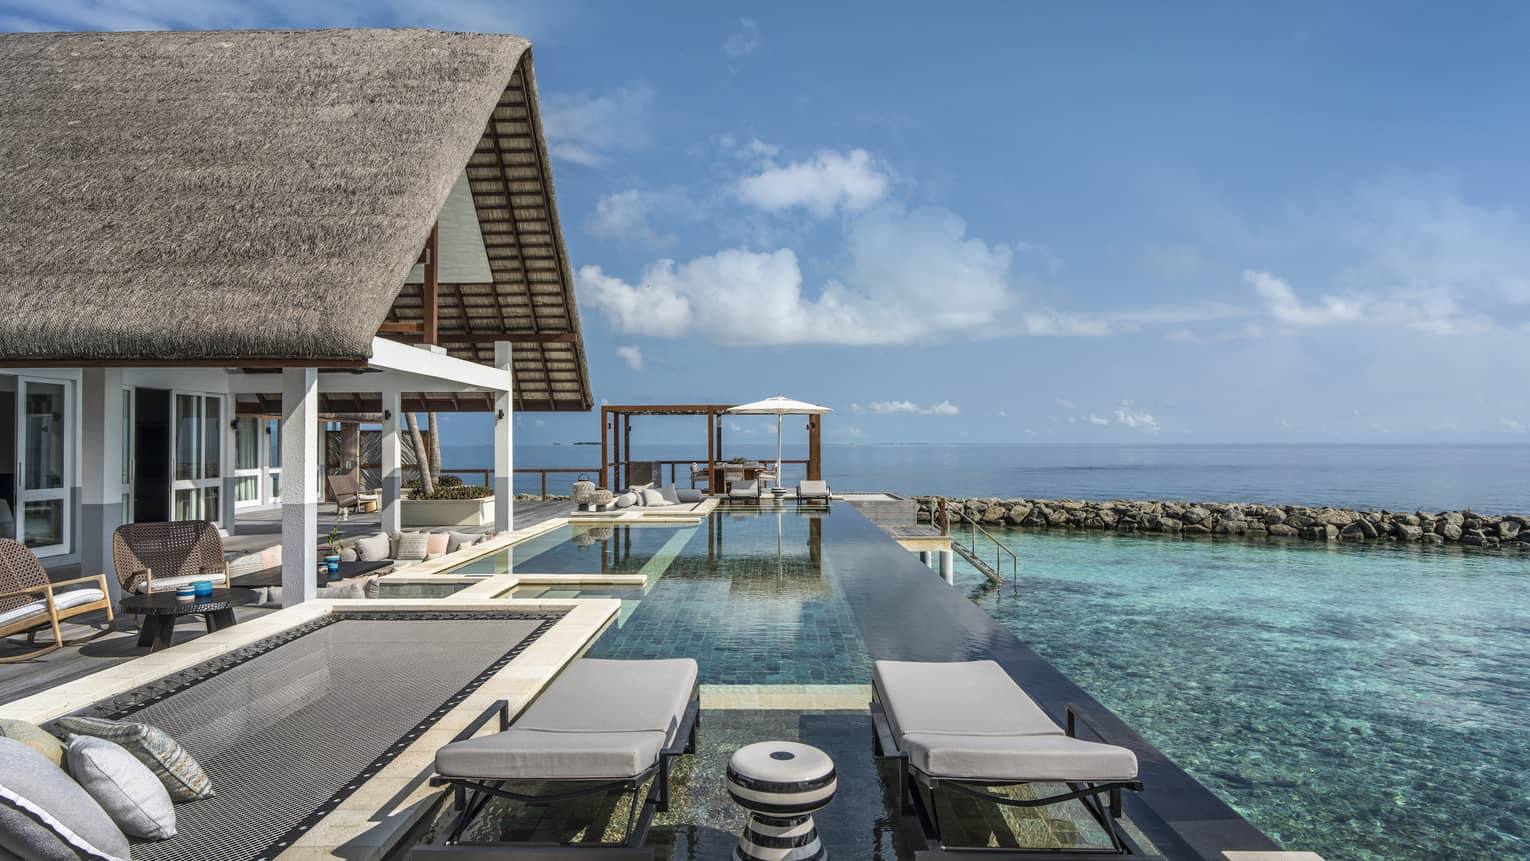 Private pool deck of overwater villa, with overwater lounge net and two chairs